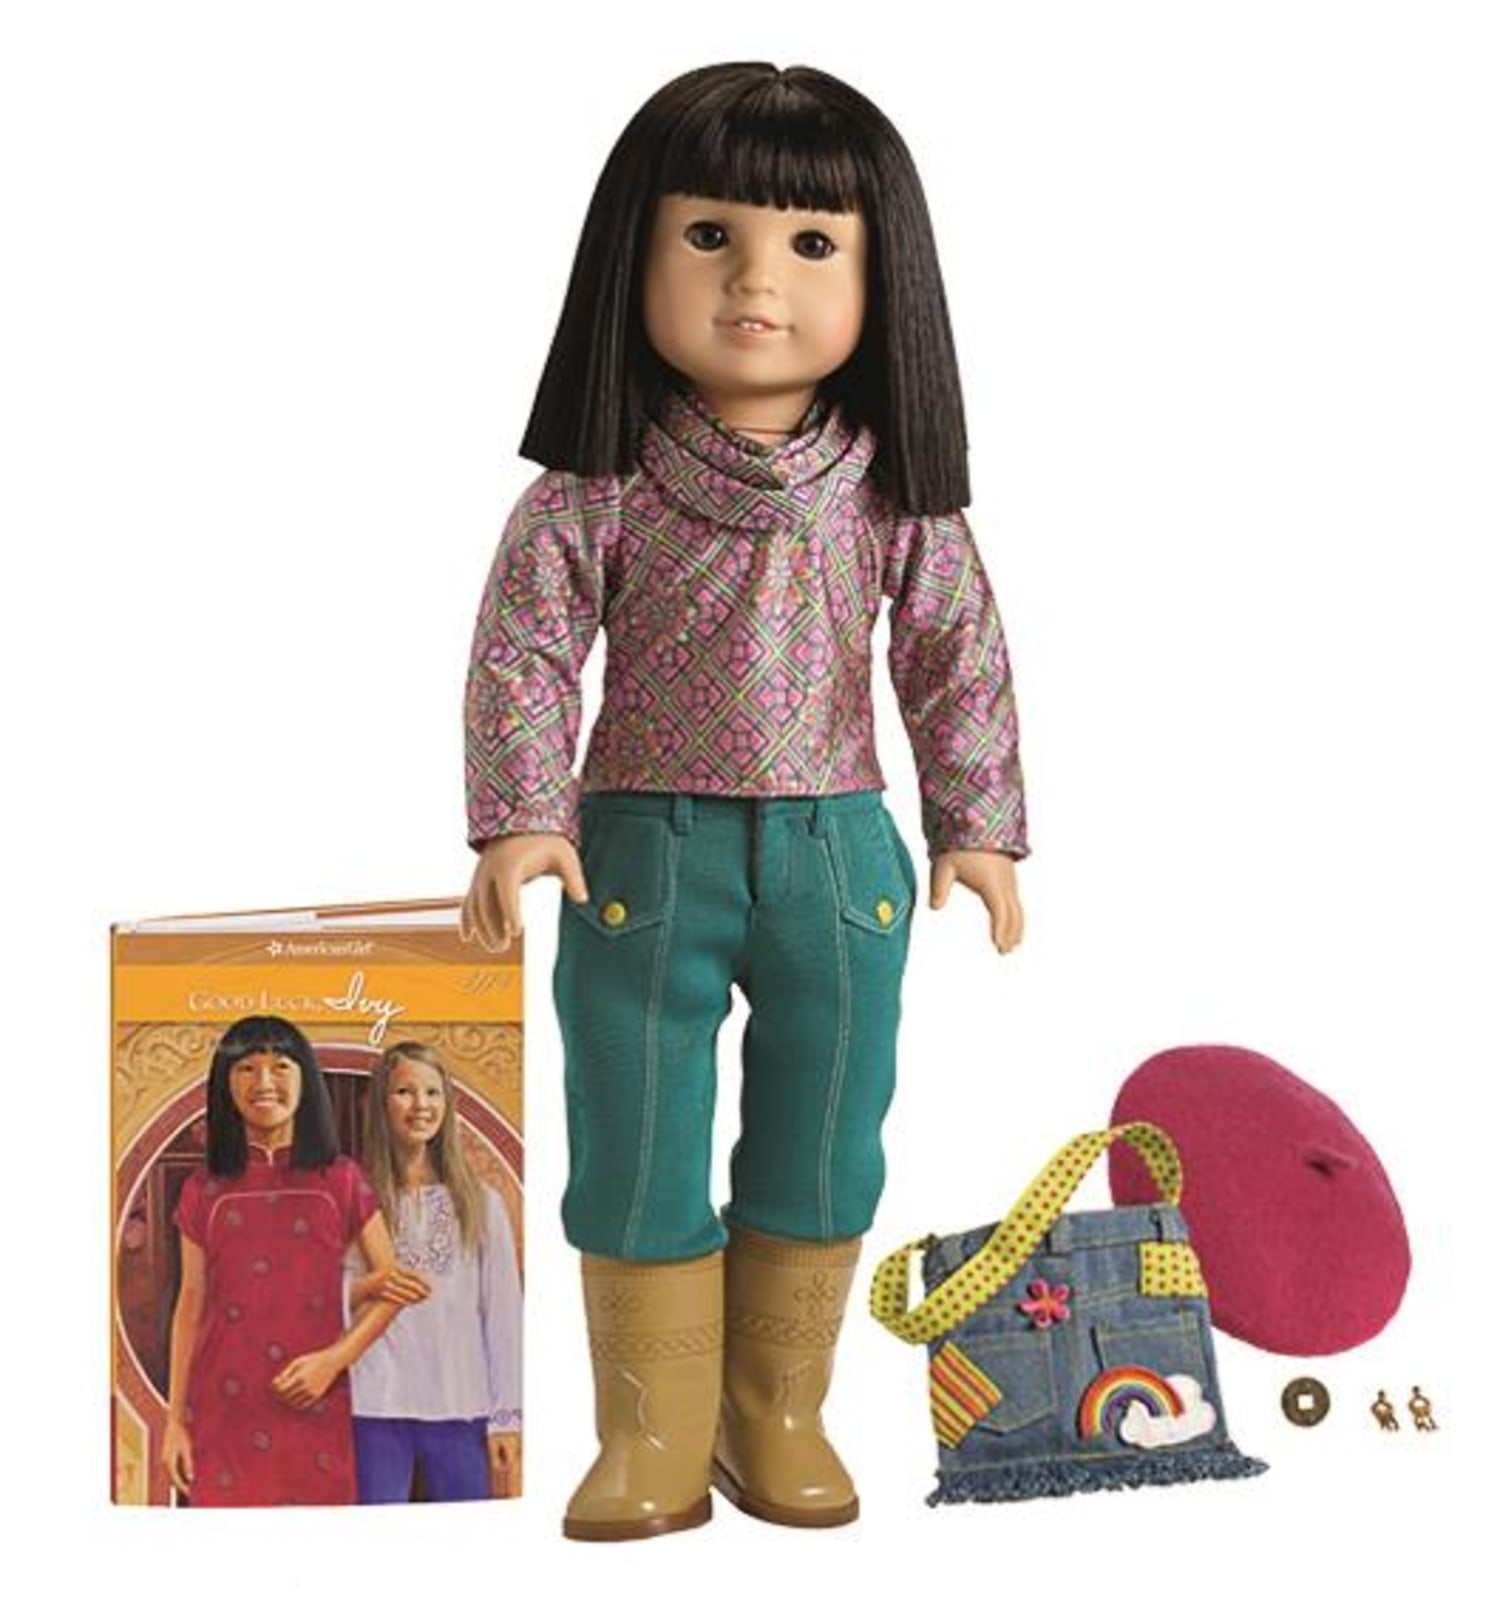 American Girl Truly Me Activity Set Game Free Shipping